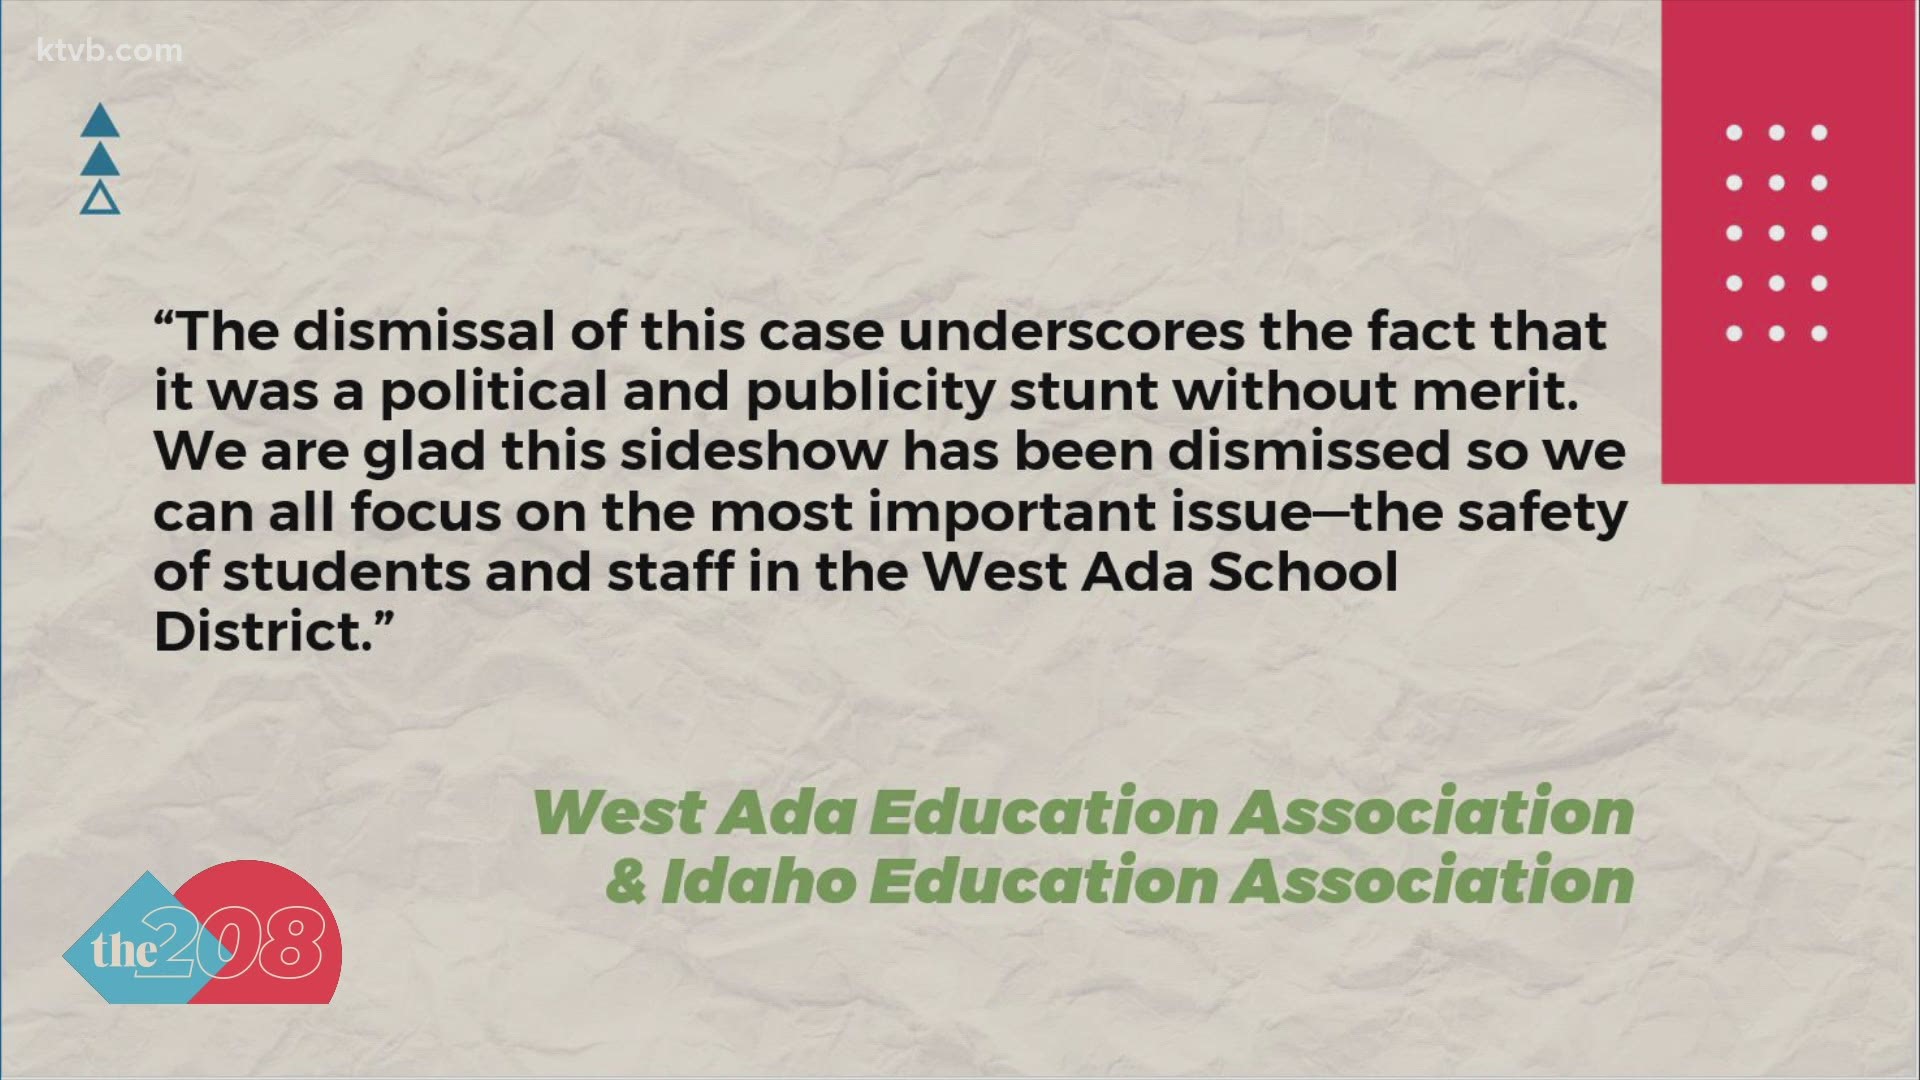 In a statement, the West Ada Education Association called the lawsuit a "sideshow" and a "political and publicity stunt."